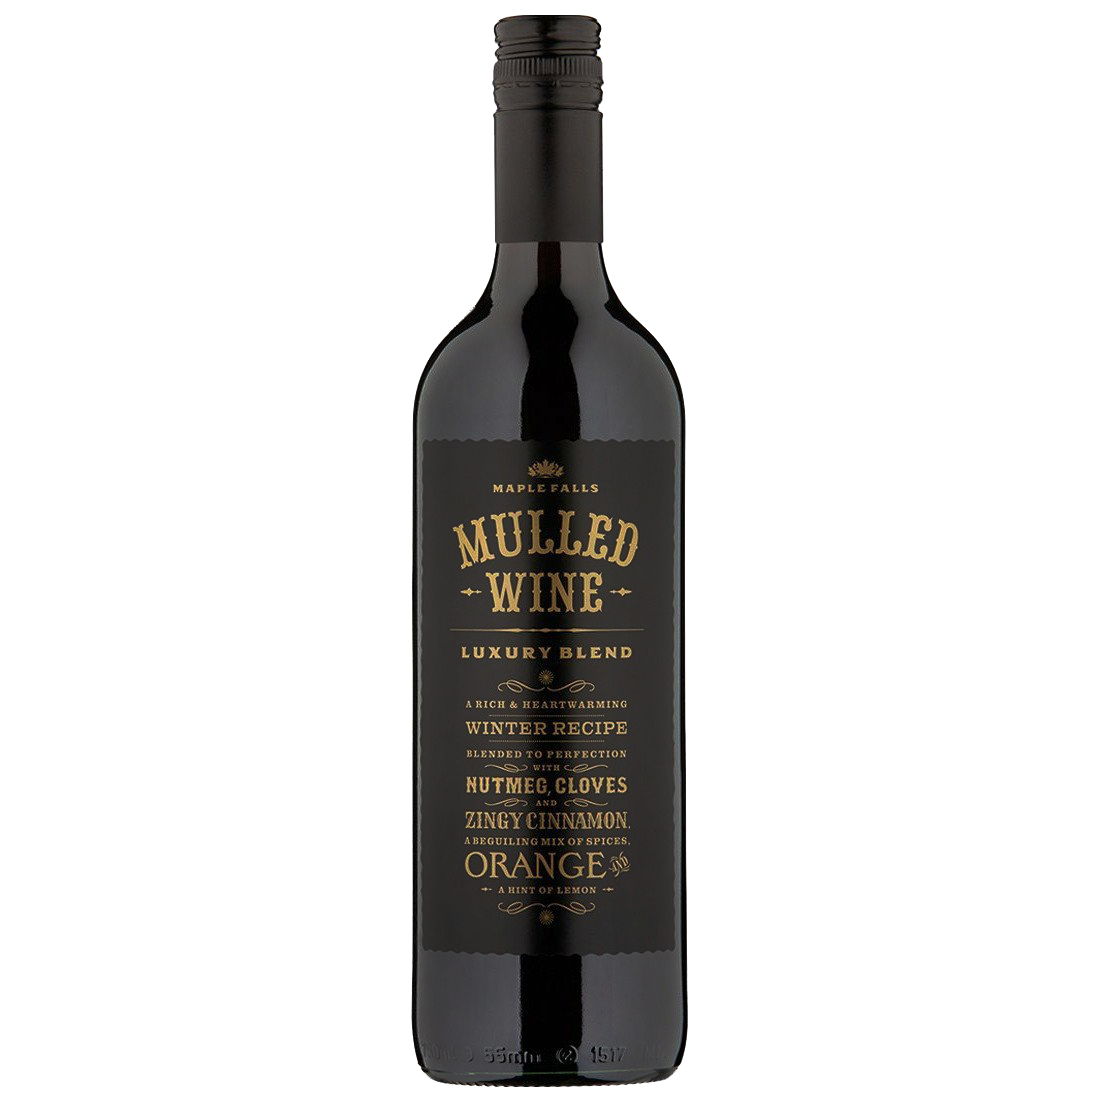 Mulled Wine, Maple Falls - Luxury Blend 75cl